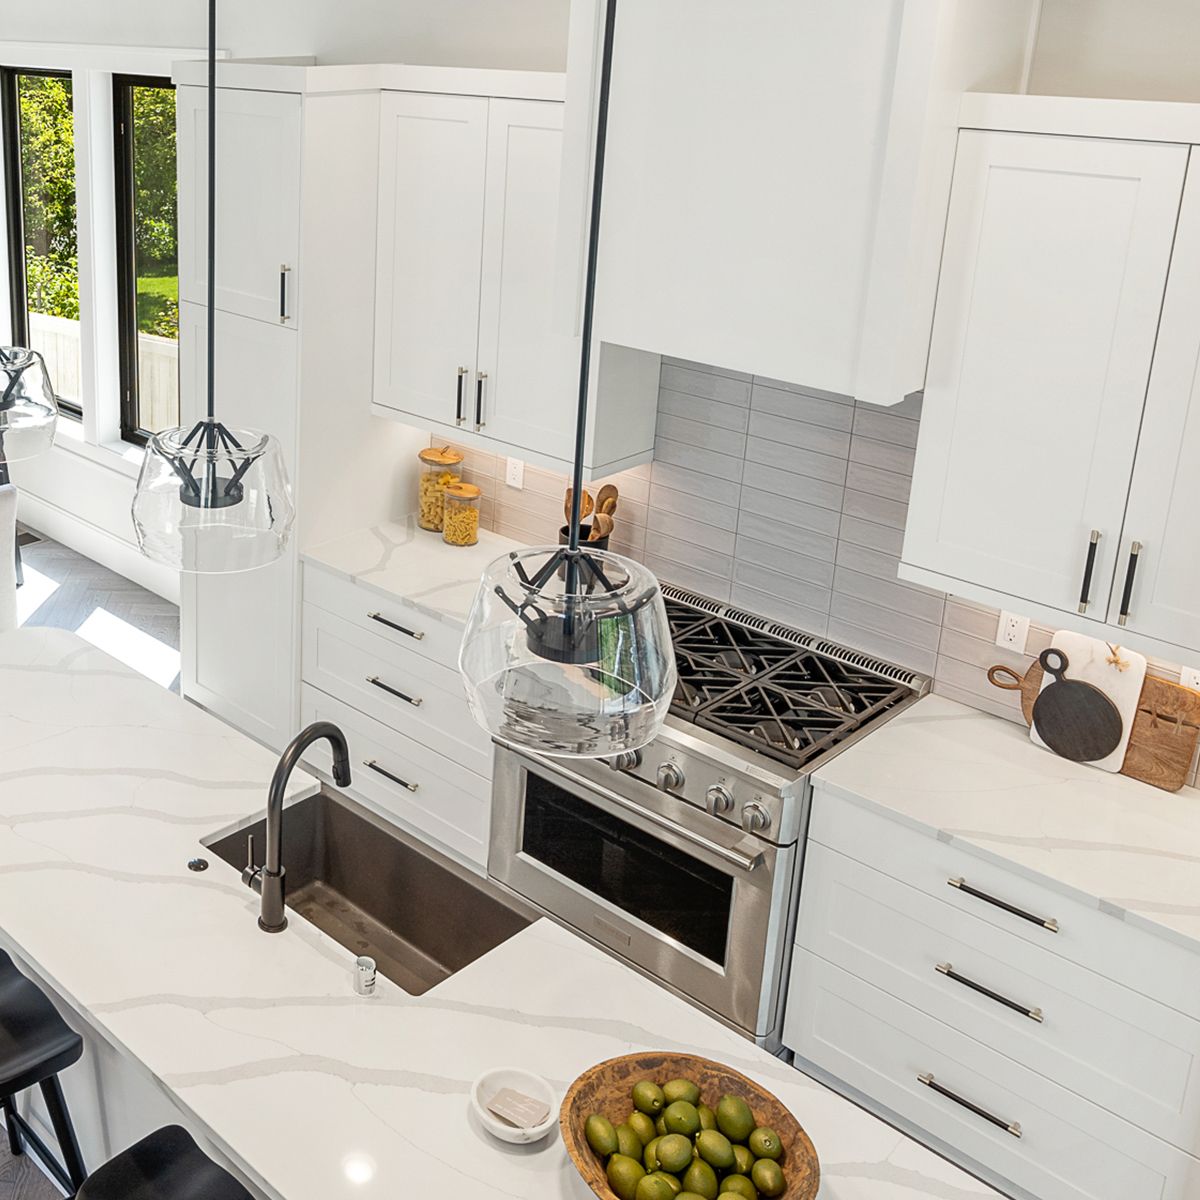 Modern kitchen with white cabinets and drawers, silver appliances, ranch style sink, white tile backsplash and white marble countertops. 